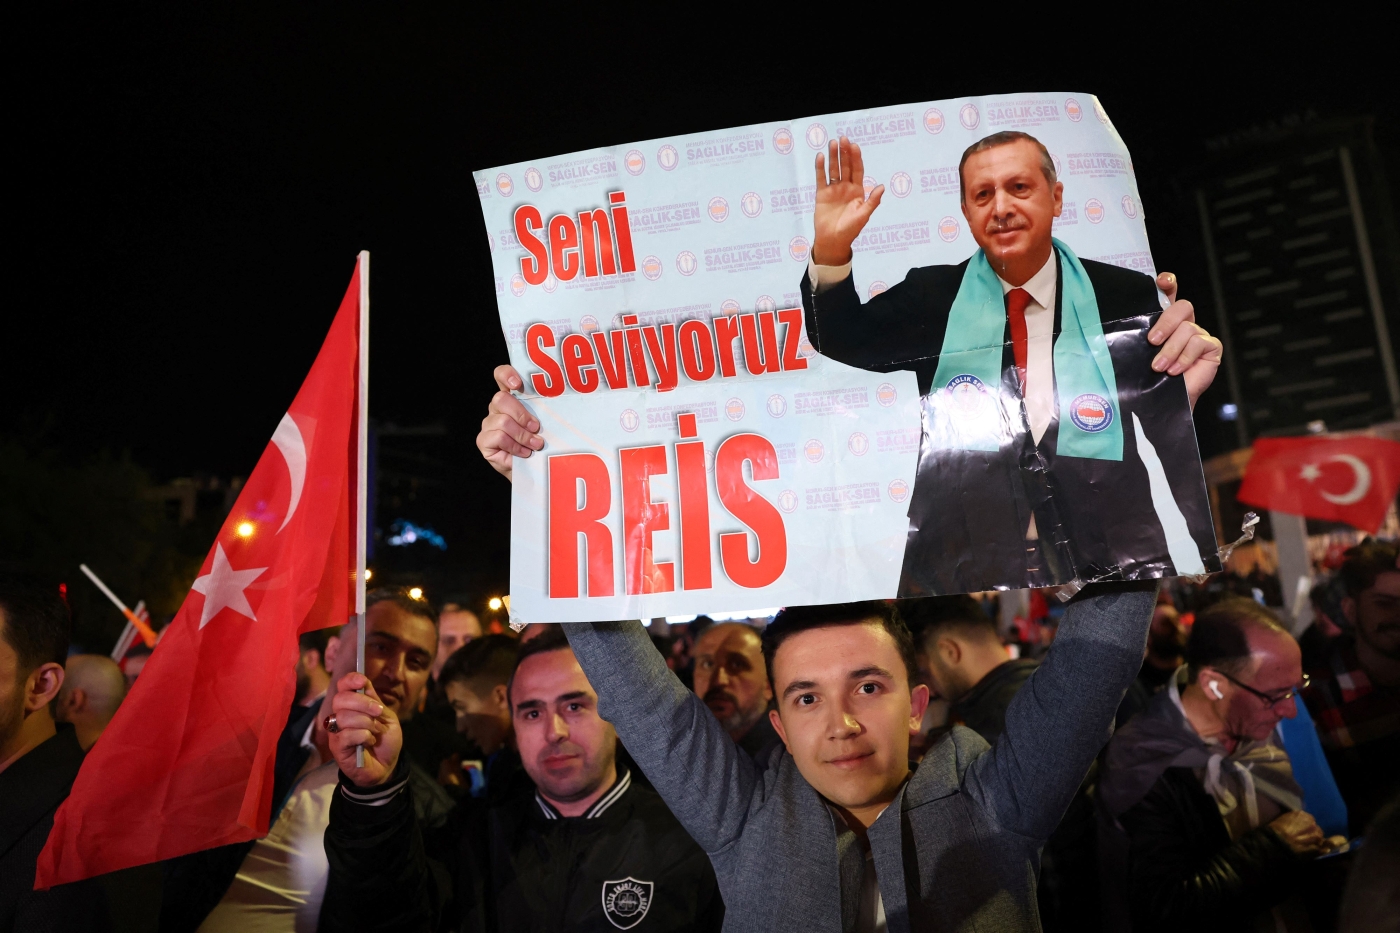 A supporter of Turkish President Tayyip Erdogan holds a poster which reads "We Love You Chief" outside the AKP headquarters after polls closed in Turkey's presidental and parliamentary elections in Ankara, Turkey May 15, 2023. Turkey is braced for its first election runoff after a night of high drama showed President Recep Tayyip Erdogan edging ahead of his rival but failing to secure a first-round win (AFP)